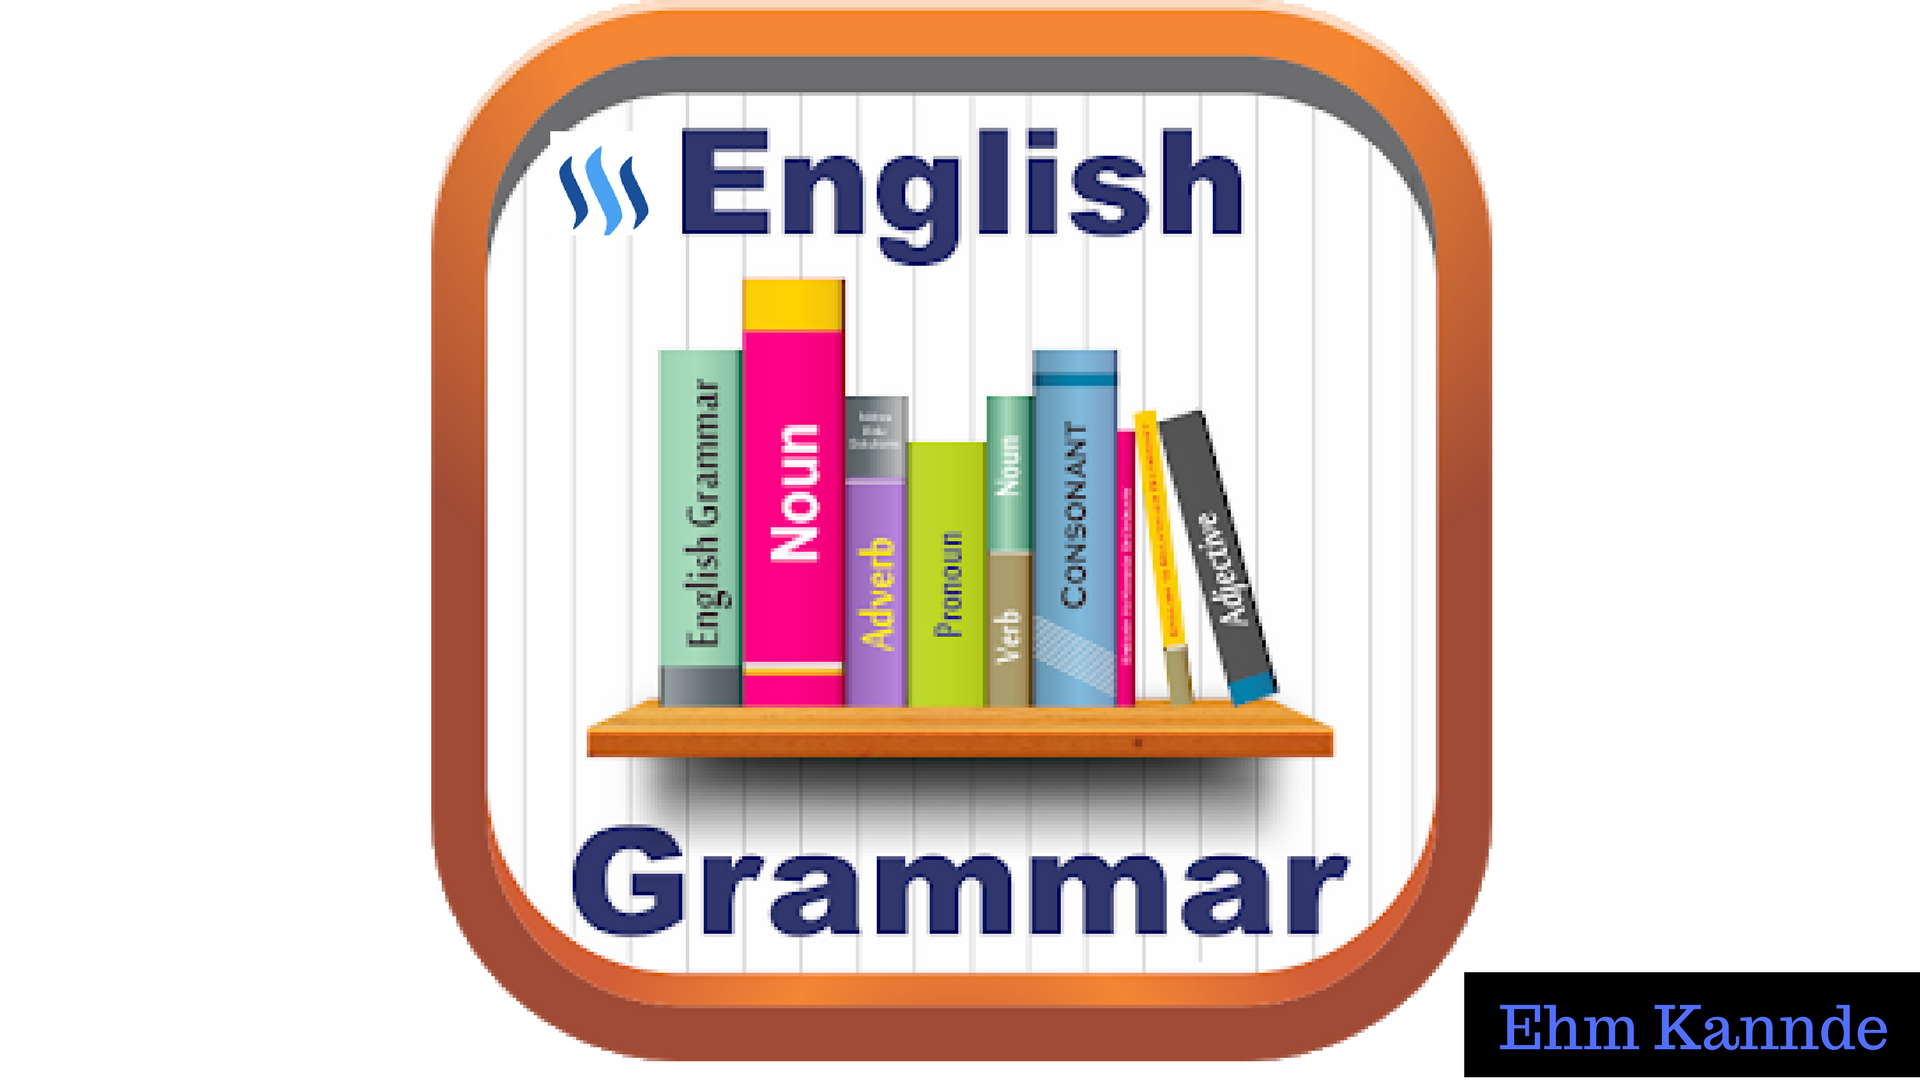 Welcome to Ehm Kanndes English Grammar lessons for non natives